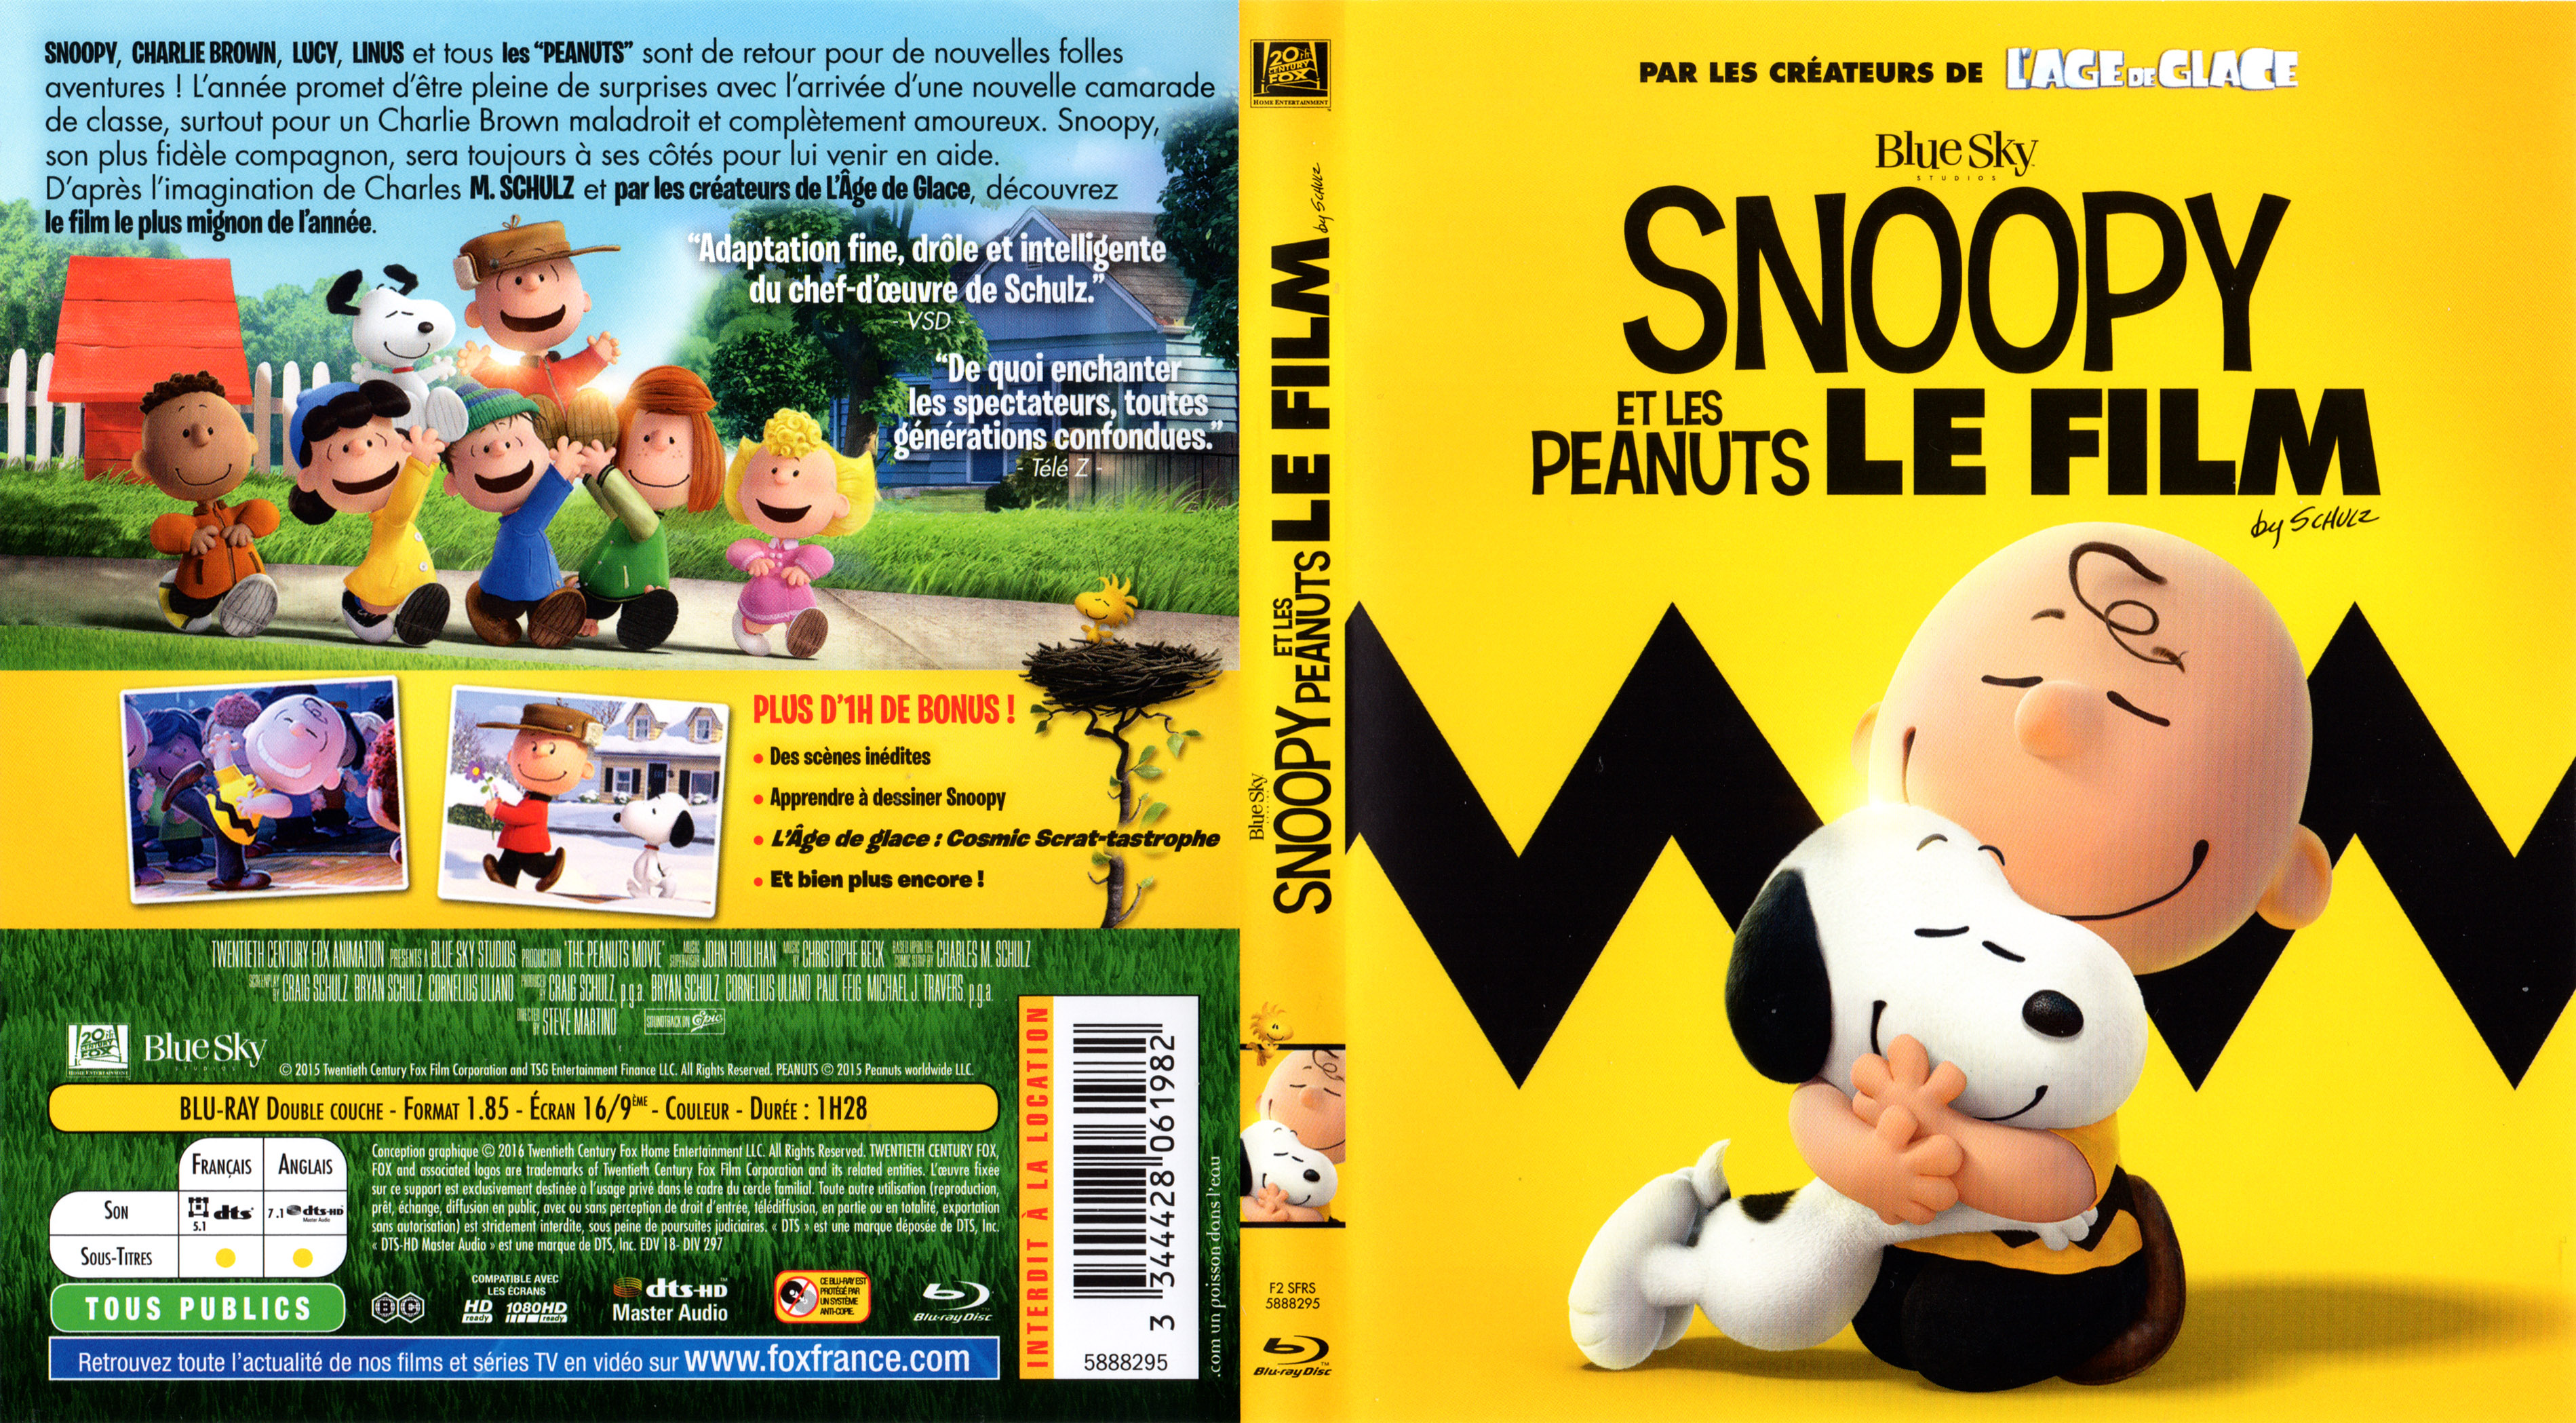 Jaquette DVD Snoopy et les Peanuts (BLU-RAY)